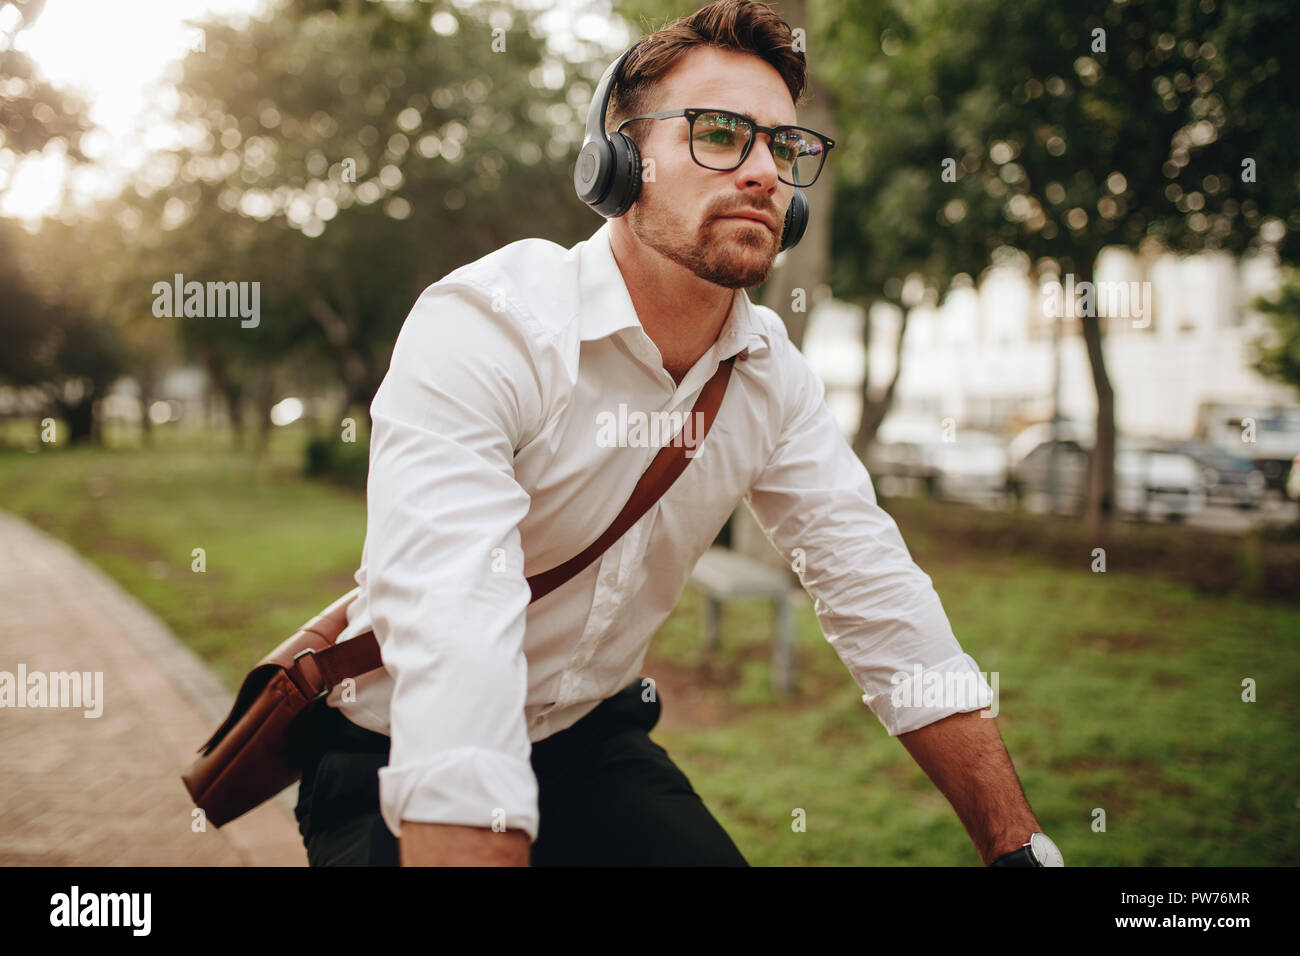 Man commuting to office on a bicycle early in the morning. Man wearing office bag and wireless earphones riding a bicycle. Stock Photo